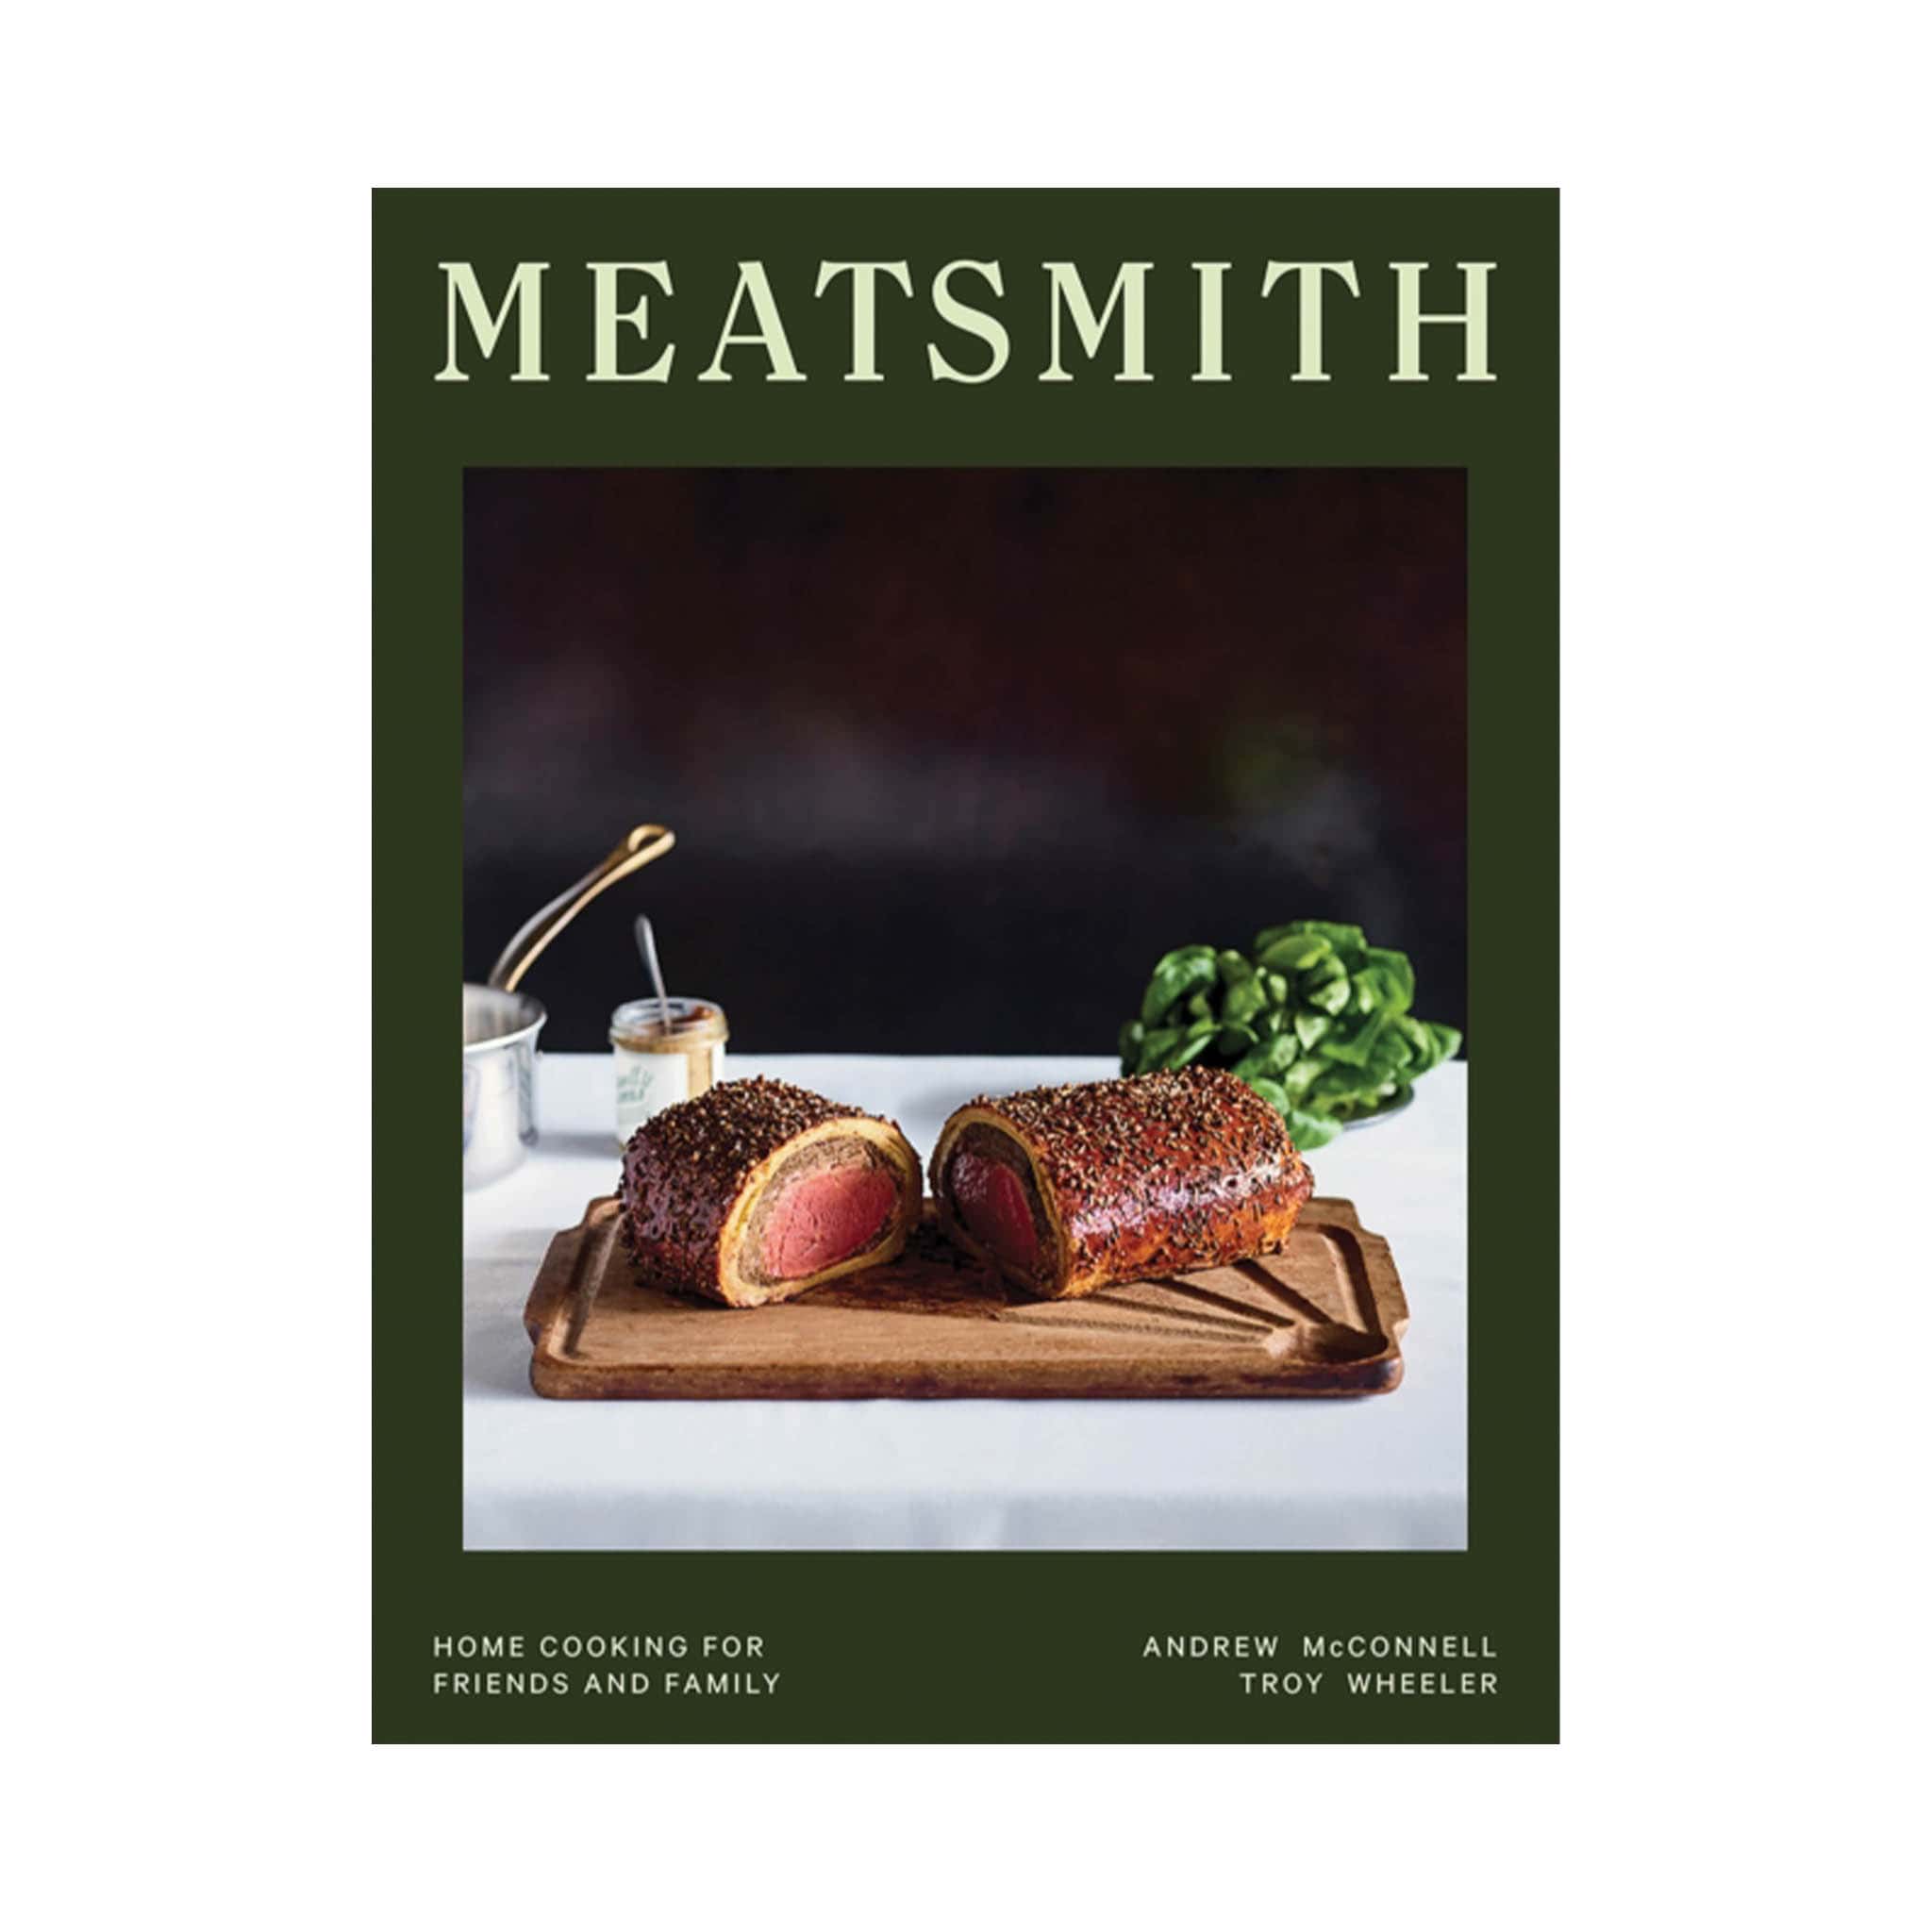 Meatsmith, by Andrew McConnell